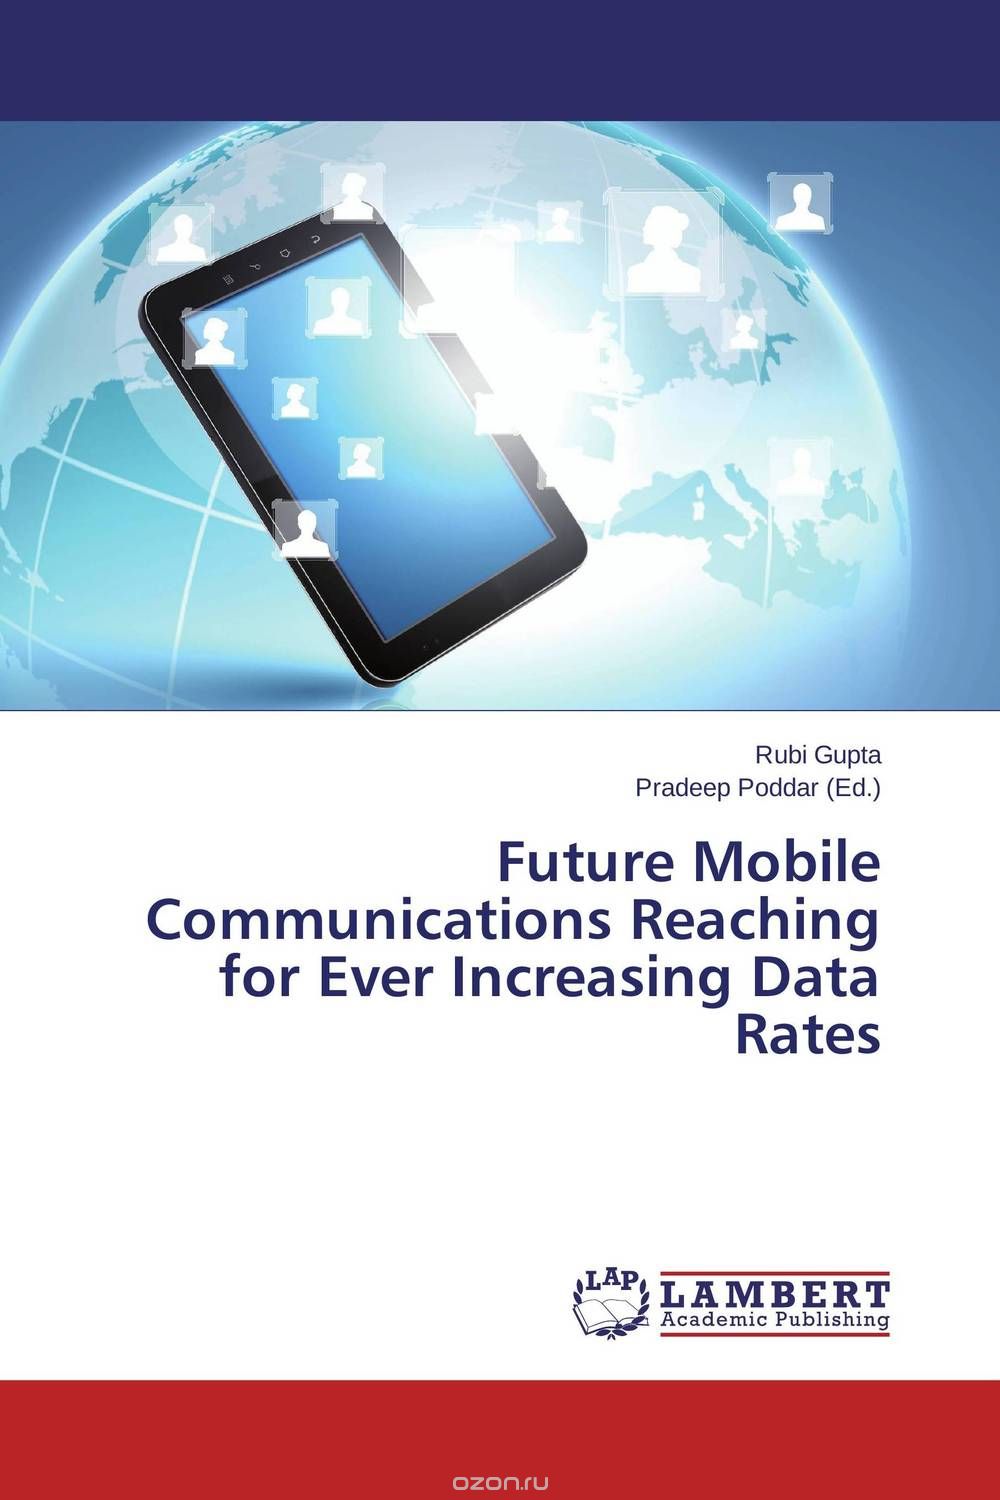 Future Mobile Communications Reaching for Ever Increasing Data Rates